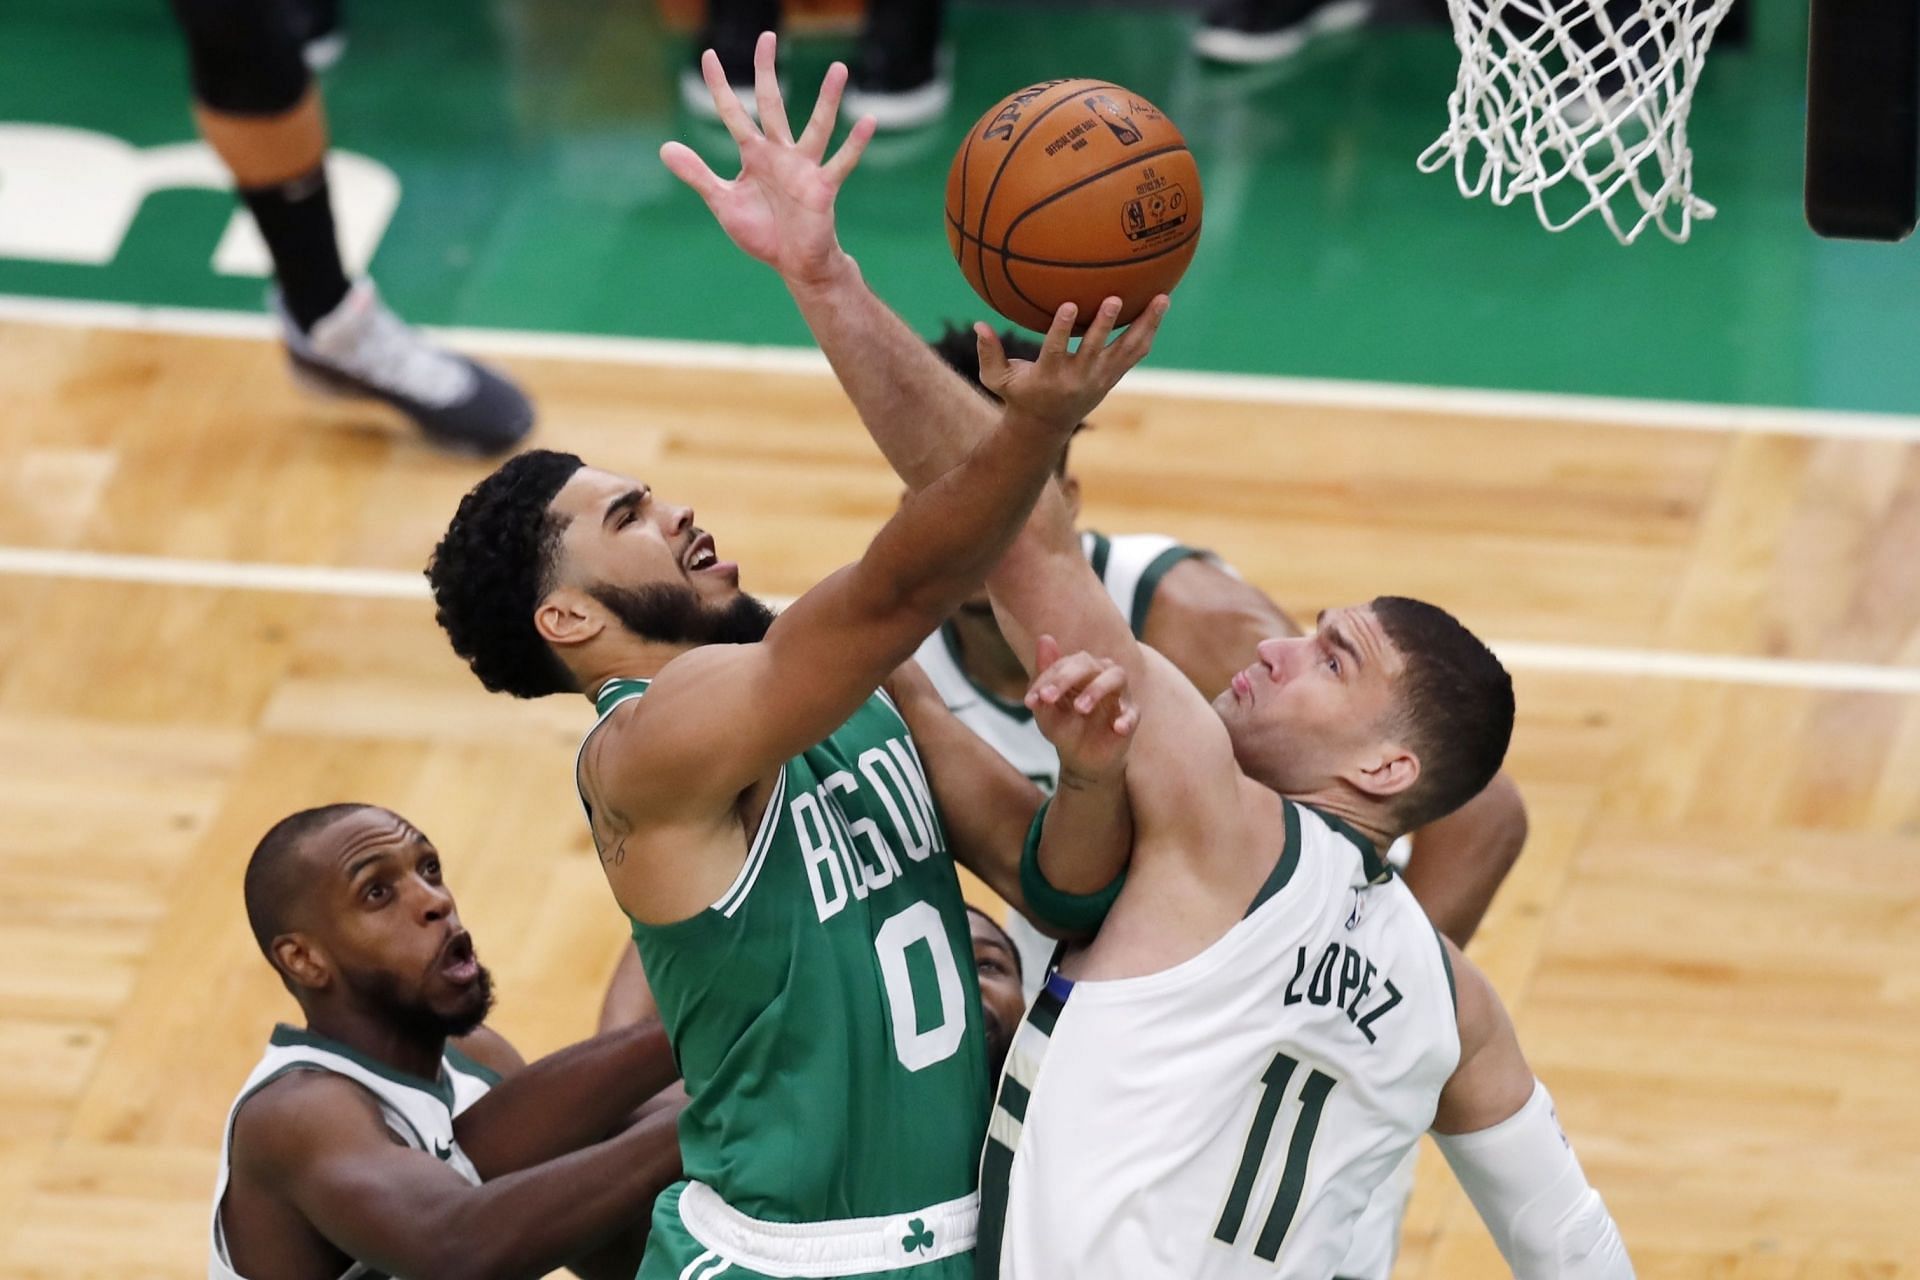 The Milwaukee Bucks will be hoping to avenge their overtime loss to the Boston Celtics in their first matchup. [Photo: Bleacher Report]